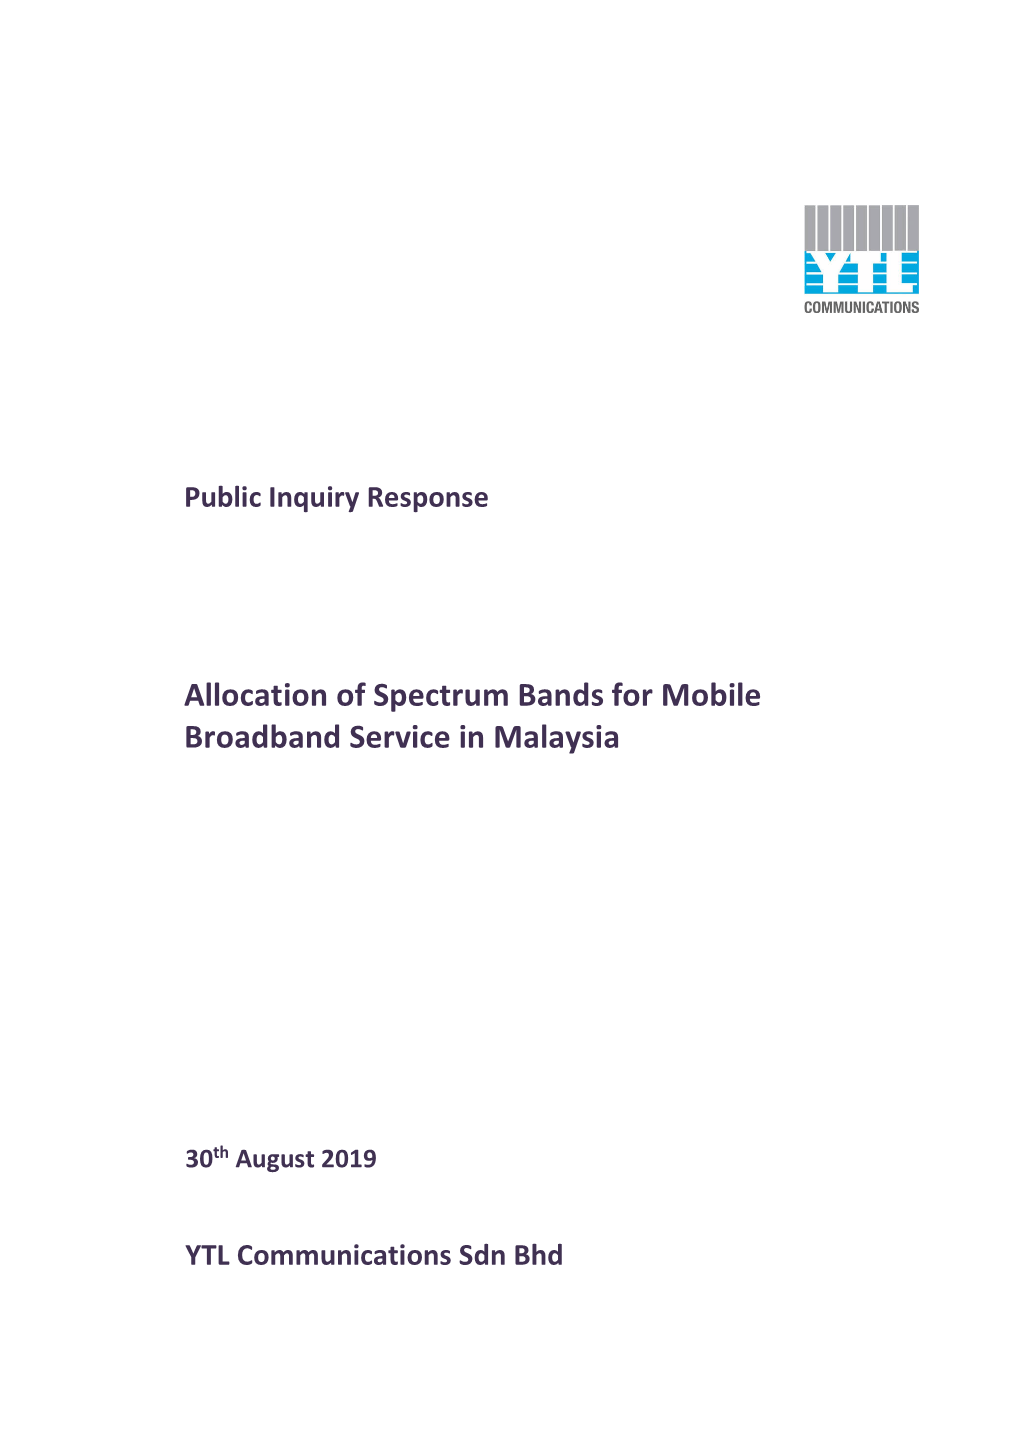 Allocation of Spectrum Bands for Mobile Broadband Service in Malaysia ("PI Paper")